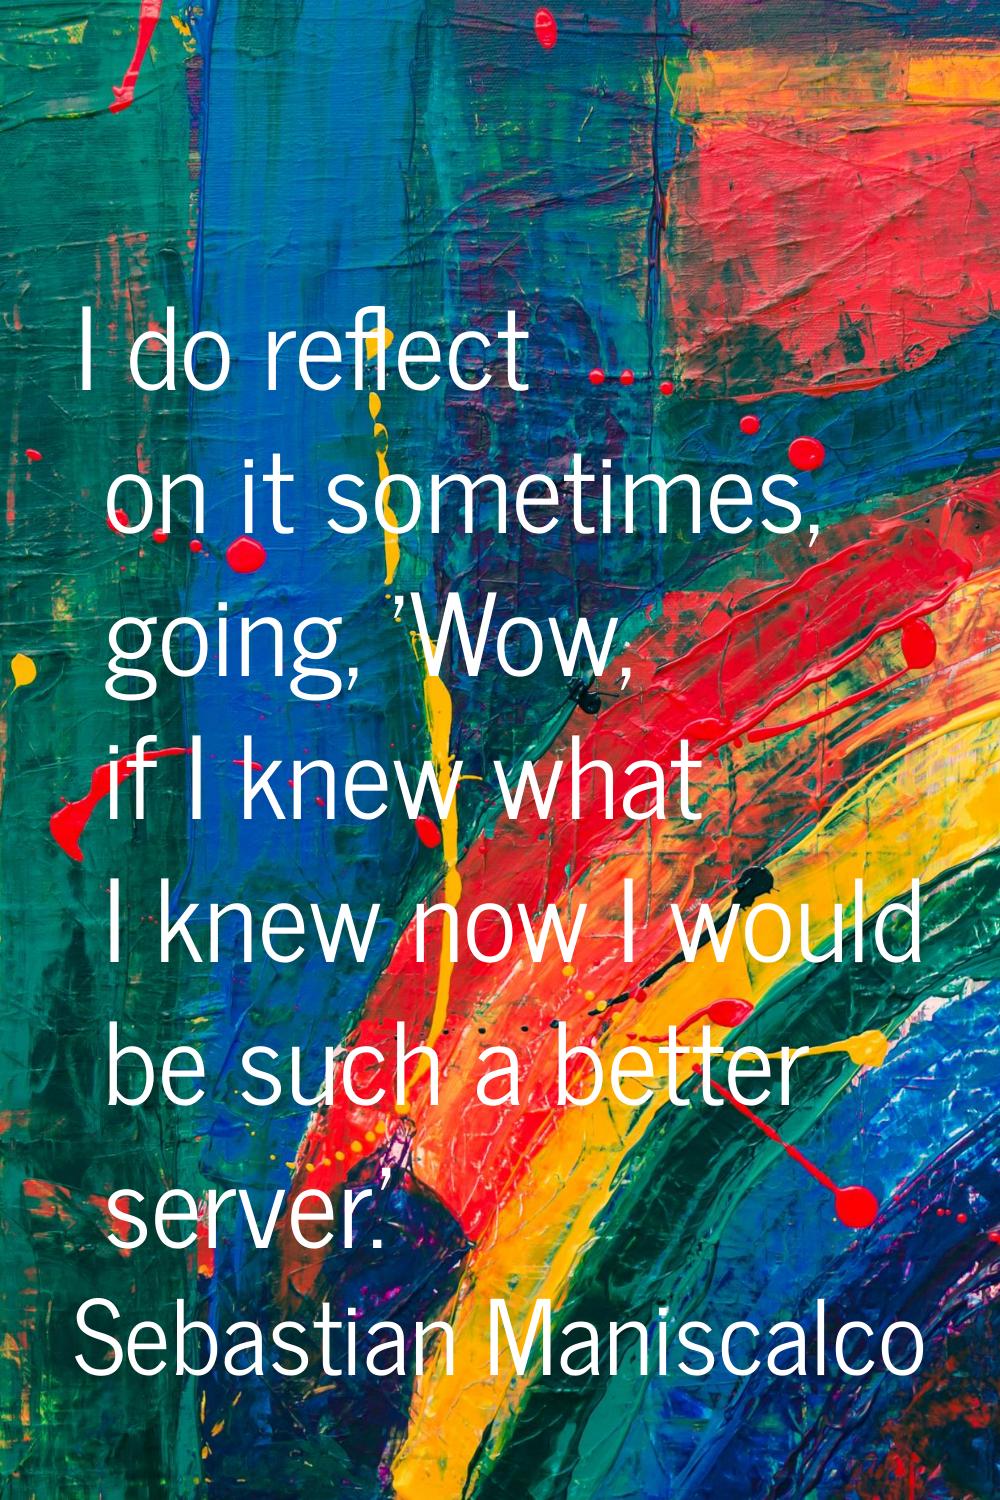 I do reflect on it sometimes, going, 'Wow, if I knew what I knew now I would be such a better serve